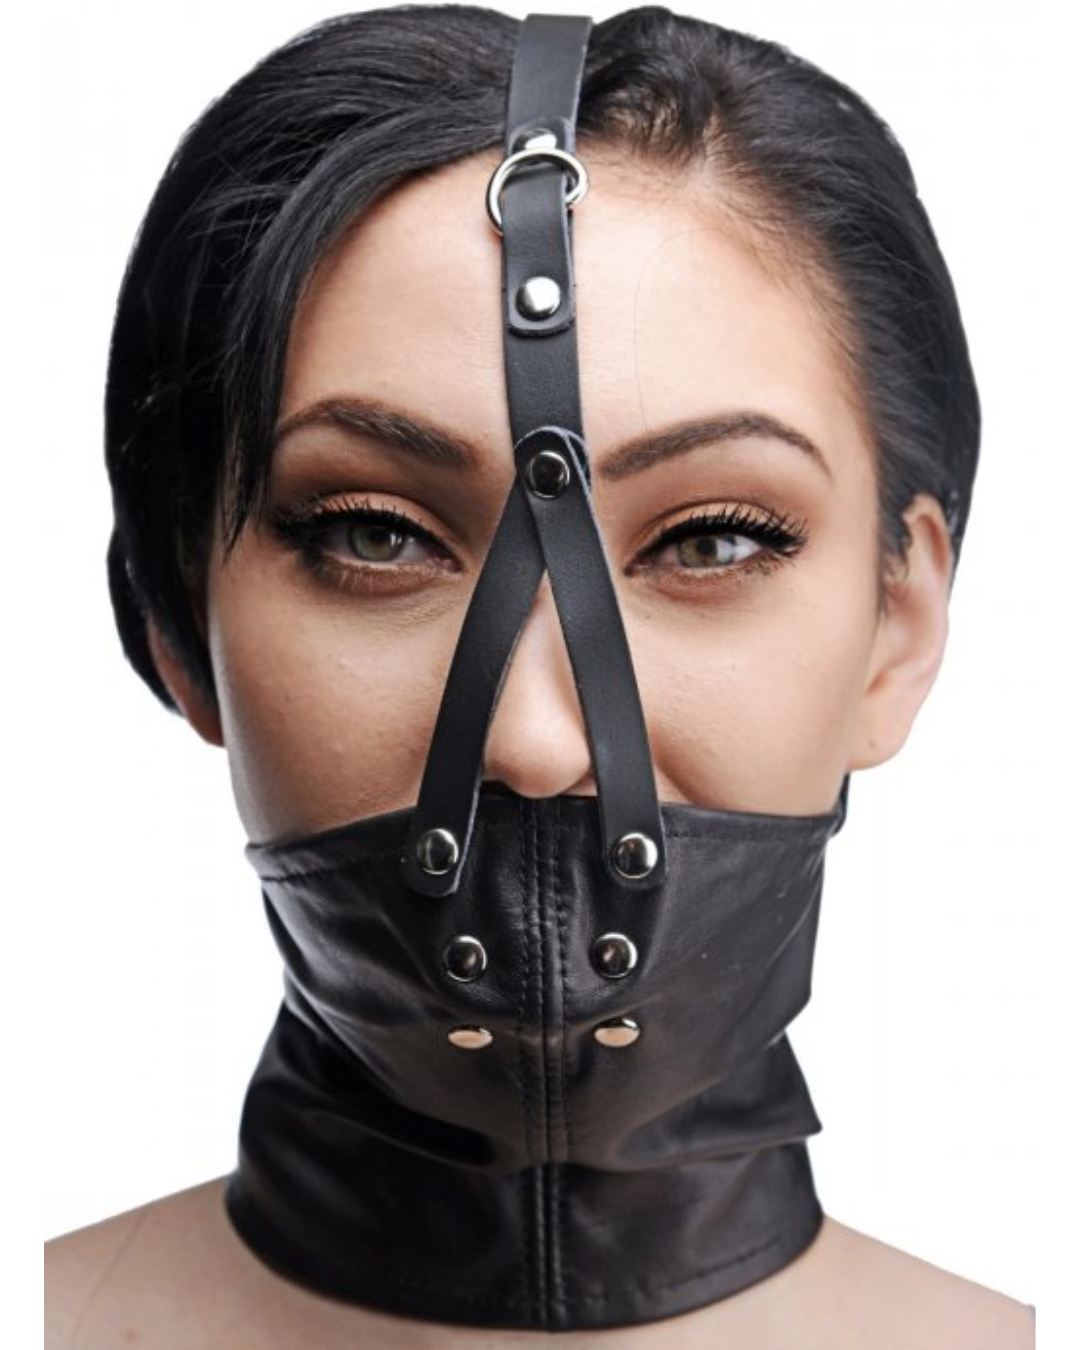 Neck Corset Harness With Stuffer Gag